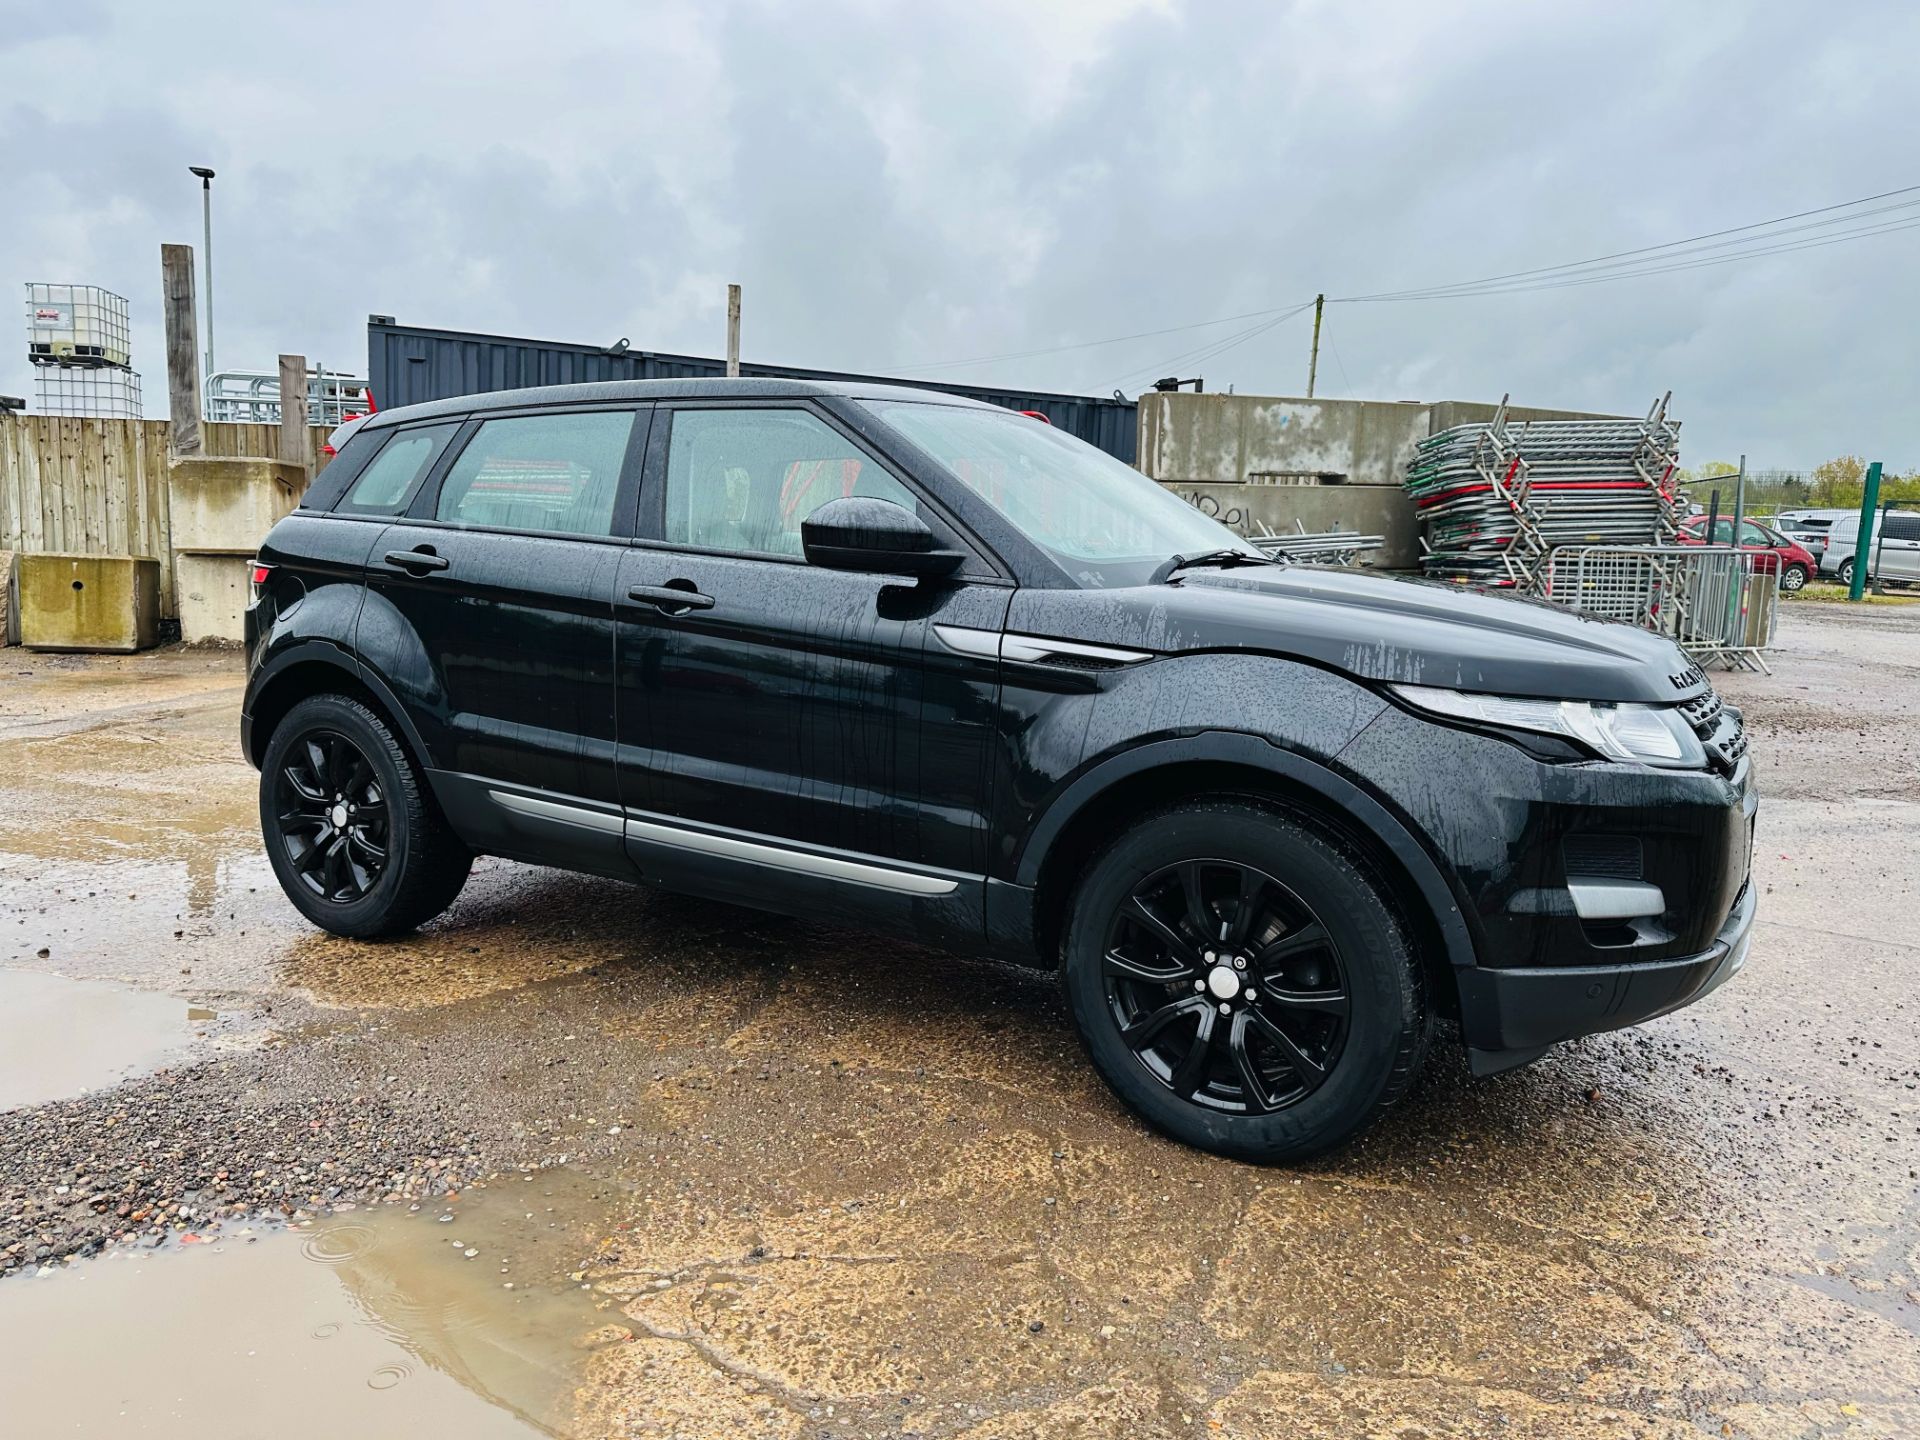 (RESERVE MET) LAND ROVER EVOQUE PURE 2.2 ED4 *TECH PACK* AIR CON - FULL LEATHER INTERIOR - NO VAT